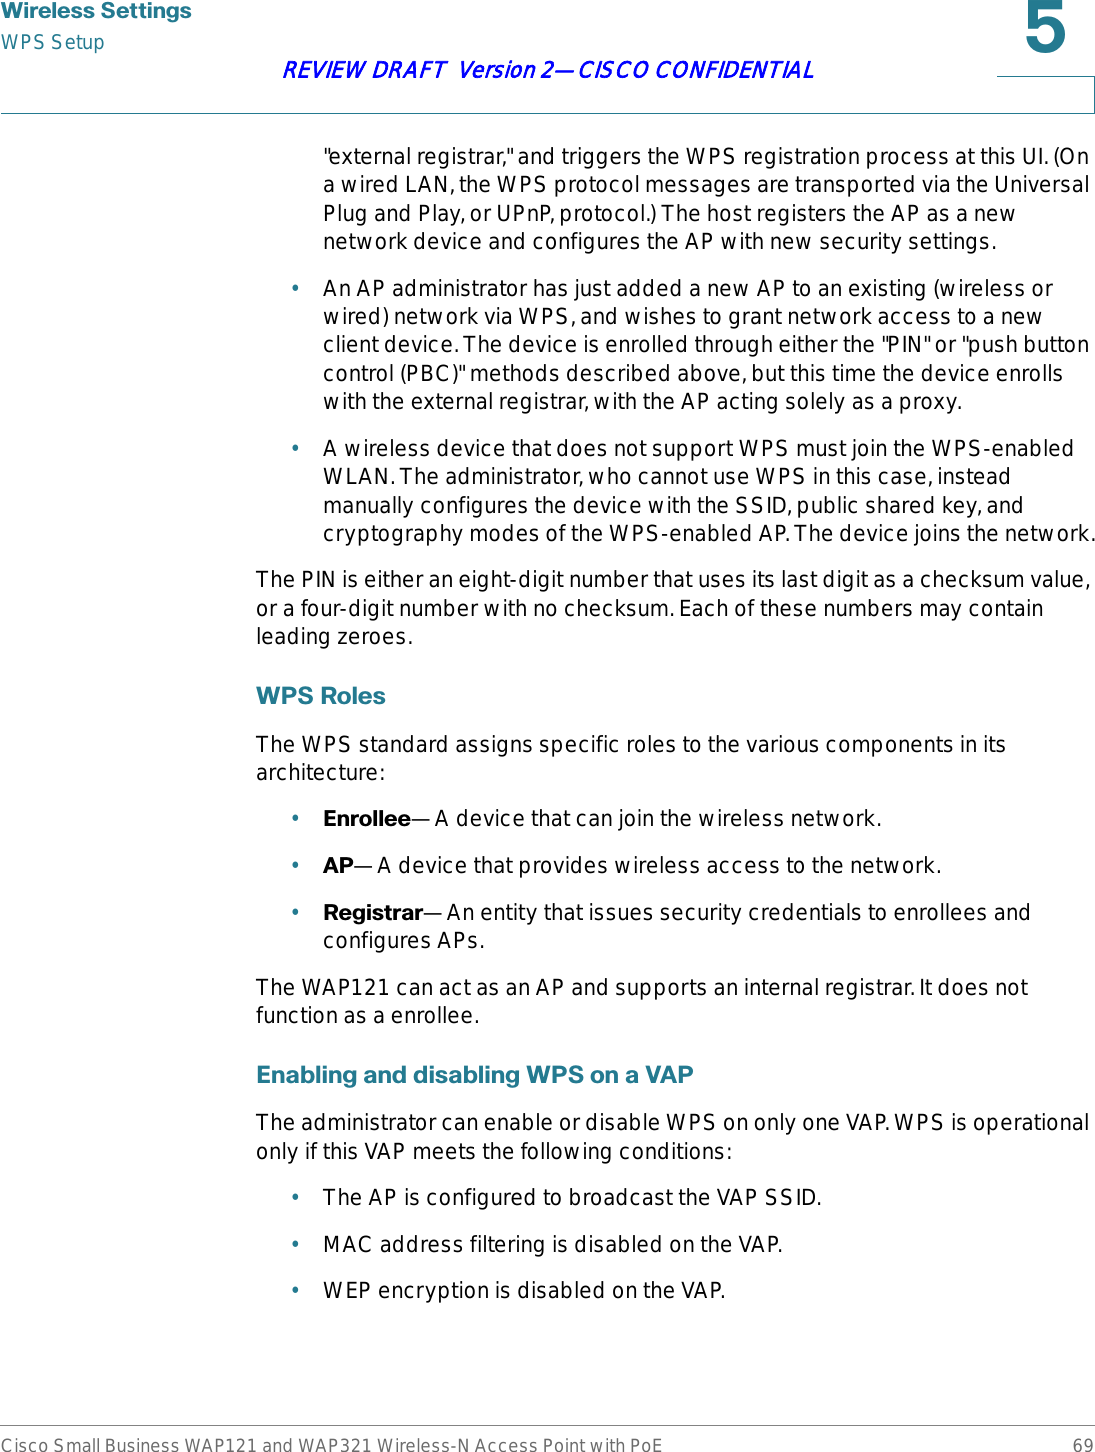 :LUHOHVV6HWWLQJVWPS SetupCisco Small Business WAP121 and WAP321 Wireless-N Access Point with PoE 69REVIEW DRAFT  Version 2—CISCO CONFIDENTIAL&quot;external registrar,&quot; and triggers the WPS registration process at this UI. (On a wired LAN, the WPS protocol messages are transported via the Universal Plug and Play, or UPnP, protocol.) The host registers the AP as a new network device and configures the AP with new security settings.•An AP administrator has just added a new AP to an existing (wireless or wired) network via WPS, and wishes to grant network access to a new client device. The device is enrolled through either the &quot;PIN&quot; or &quot;push button control (PBC)&quot; methods described above, but this time the device enrolls with the external registrar, with the AP acting solely as a proxy. •A wireless device that does not support WPS must join the WPS-enabled WLAN. The administrator, who cannot use WPS in this case, instead manually configures the device with the SSID, public shared key, and cryptography modes of the WPS-enabled AP. The device joins the network.The PIN is either an eight-digit number that uses its last digit as a checksum value, or a four-digit number with no checksum. Each of these numbers may contain leading zeroes.:365ROHVThe WPS standard assigns specific roles to the various components in its architecture: •(QUROOHH—A device that can join the wireless network.•$3—A device that provides wireless access to the network.•5HJLVWUDU—An entity that issues security credentials to enrollees and configures APs. The WAP121 can act as an AP and supports an internal registrar. It does not function as a enrollee.(QDEOLQJDQGGLVDEOLQJ:36RQD9$3The administrator can enable or disable WPS on only one VAP. WPS is operational only if this VAP meets the following conditions:•The AP is configured to broadcast the VAP SSID.•MAC address filtering is disabled on the VAP.•WEP encryption is disabled on the VAP.